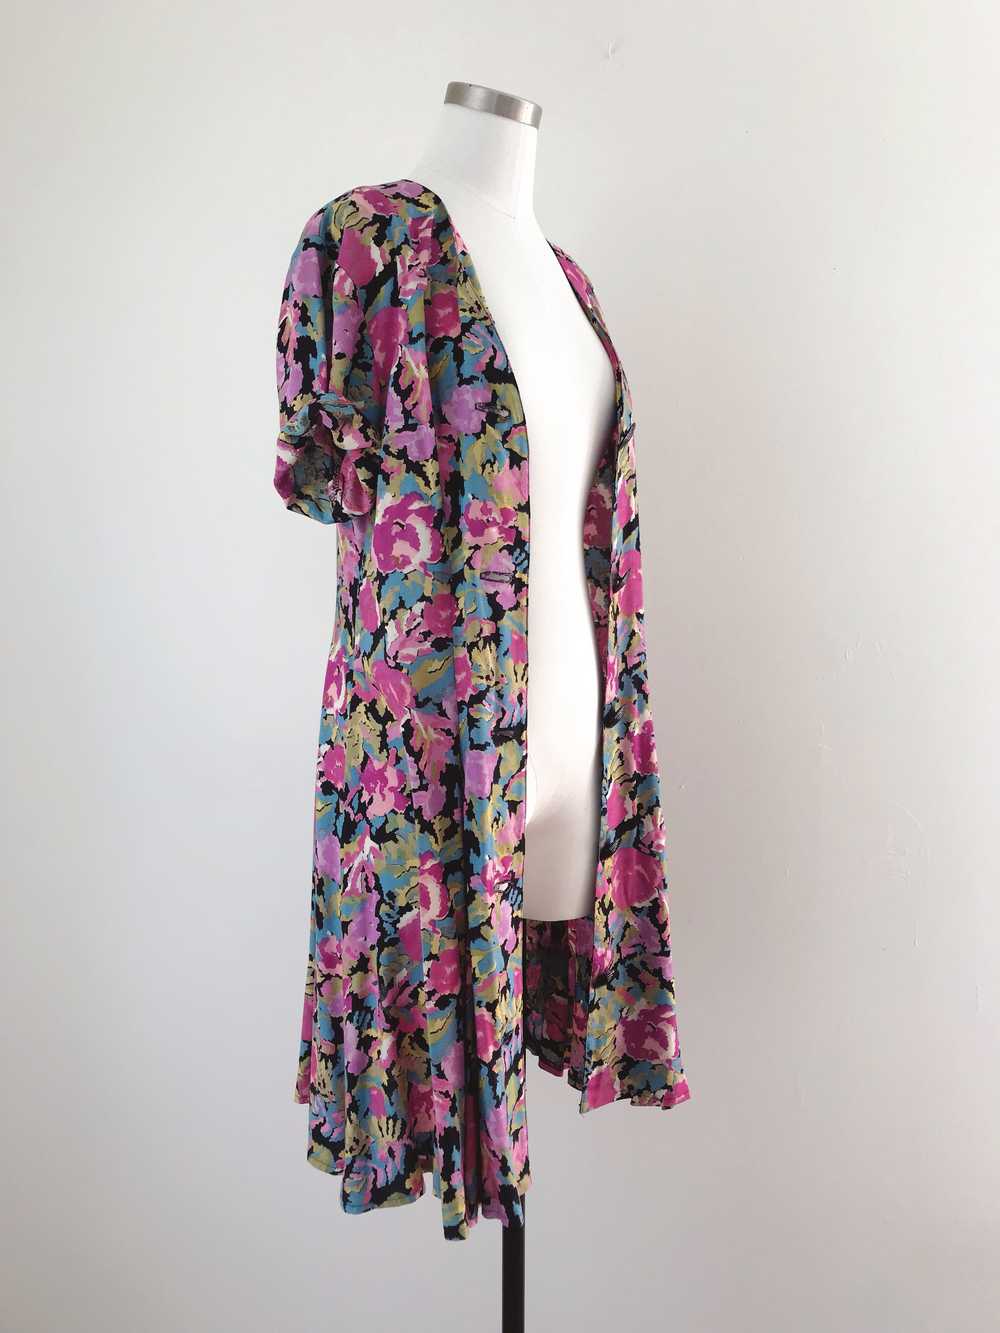 1990s Saturated Floral Minidress - image 5